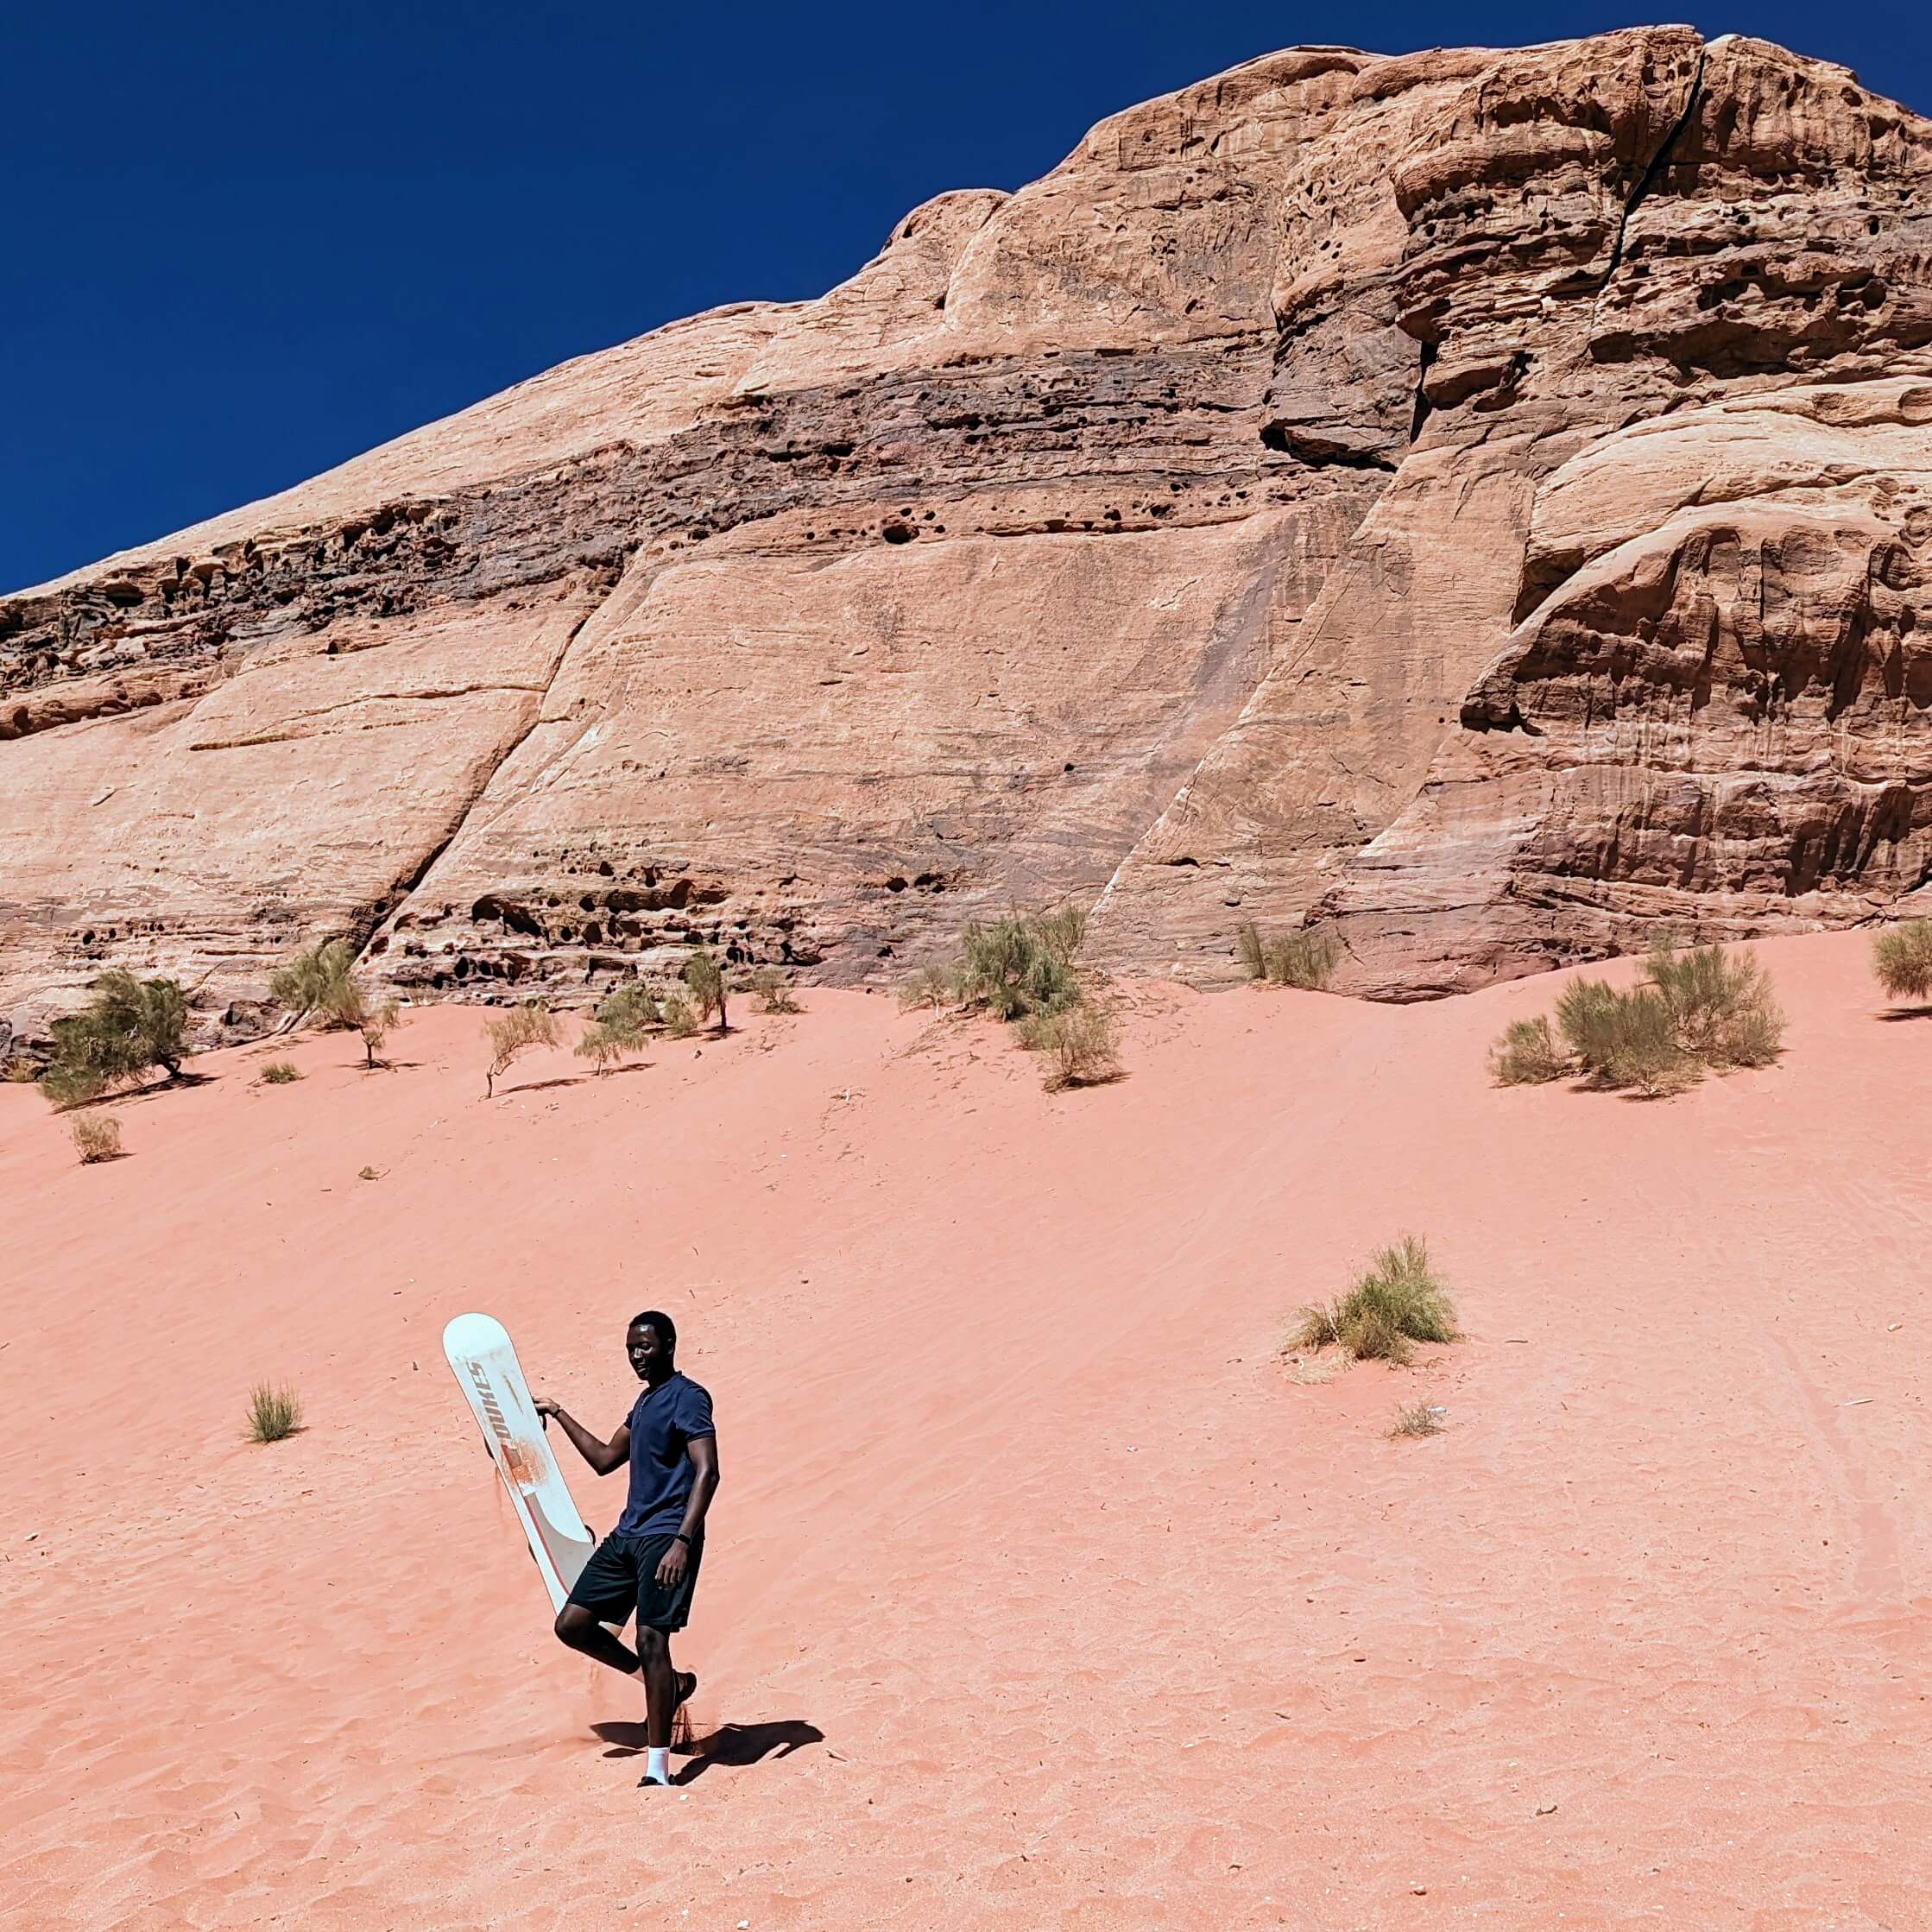 Holding a sandboard in a sandy area with mountains looming in the background